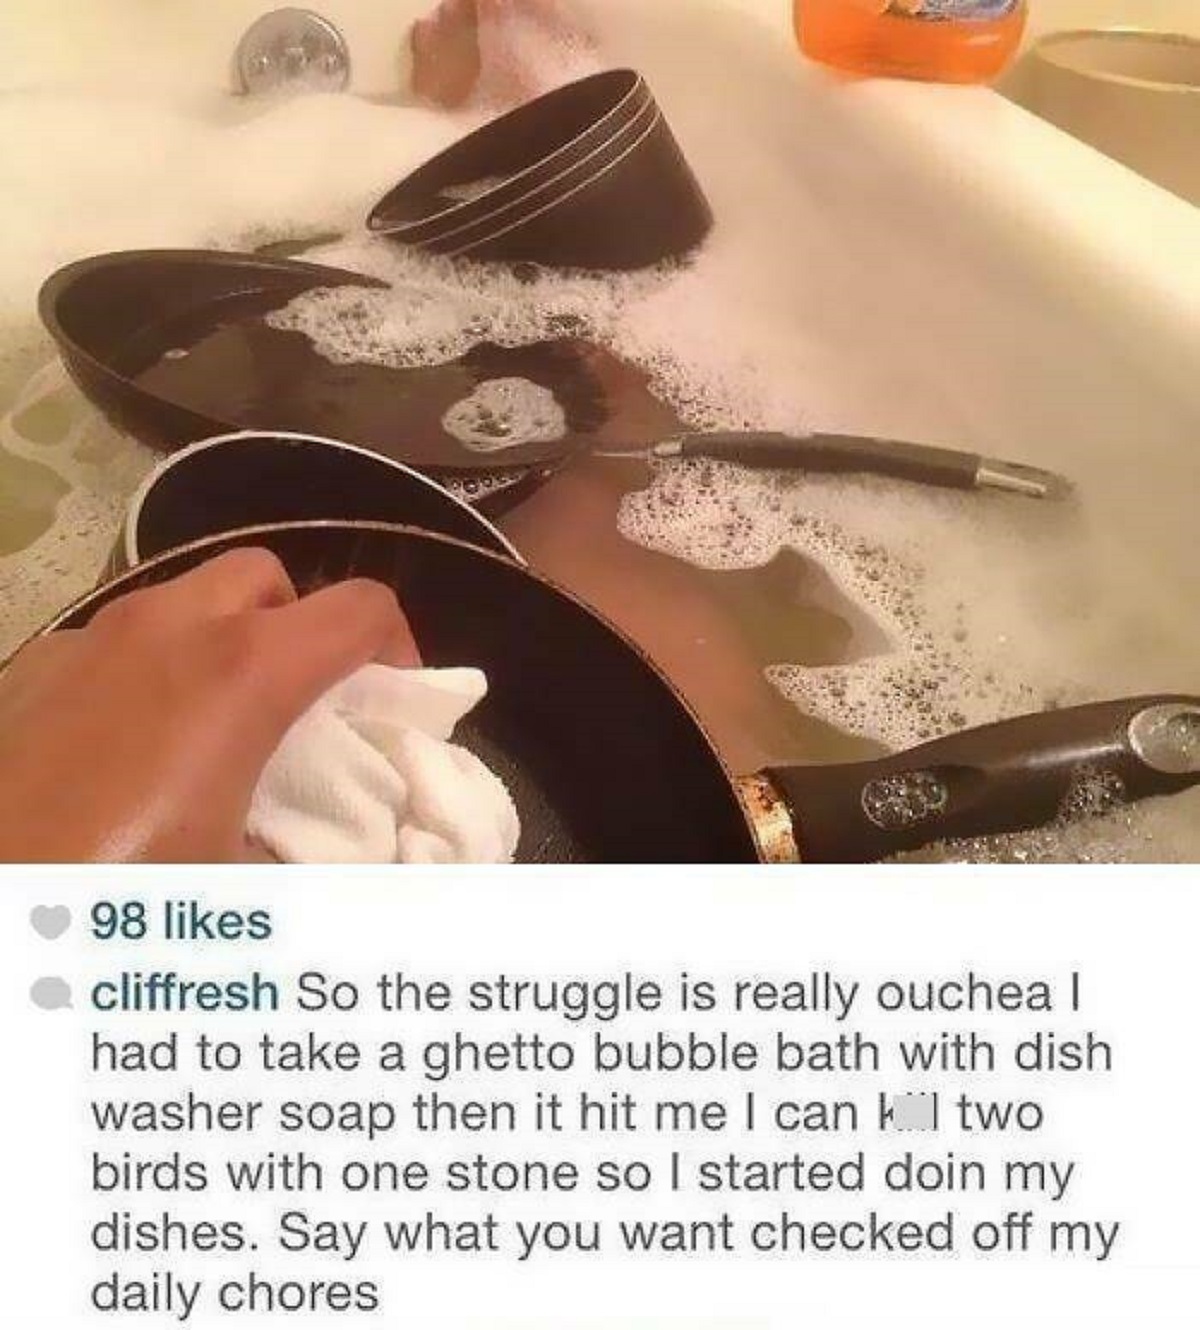 violin - 98 cliffresh So the struggle is really ouchea I had to take a ghetto bubble bath with dish washer soap then it hit me I can kill two birds with one stone so I started doin my dishes. Say what you want checked off my daily chores